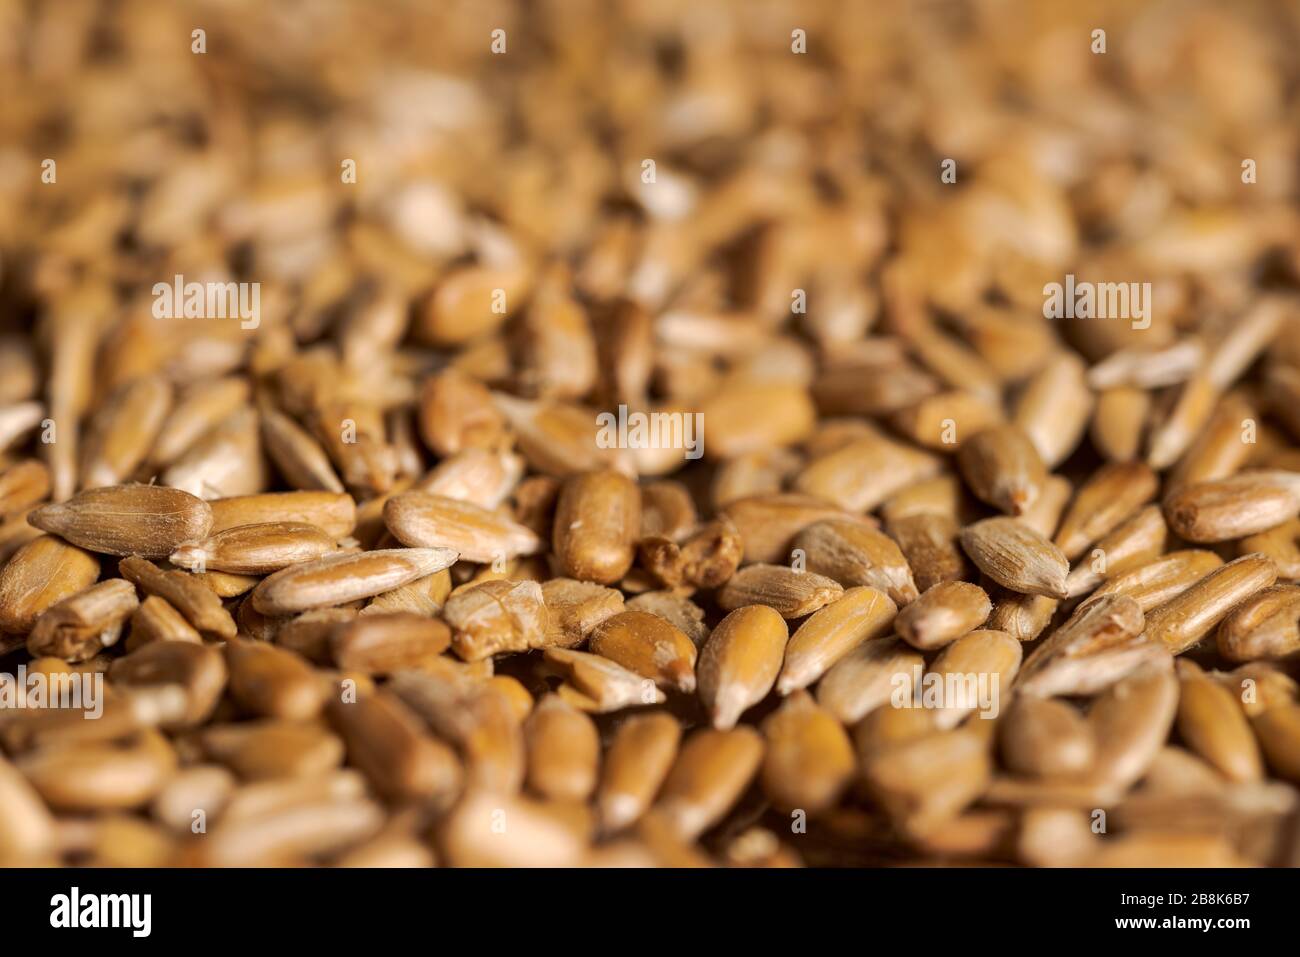 Full frame shot of roasted sunflower seeds spread on tray with selective focus and blurred background Stock Photo